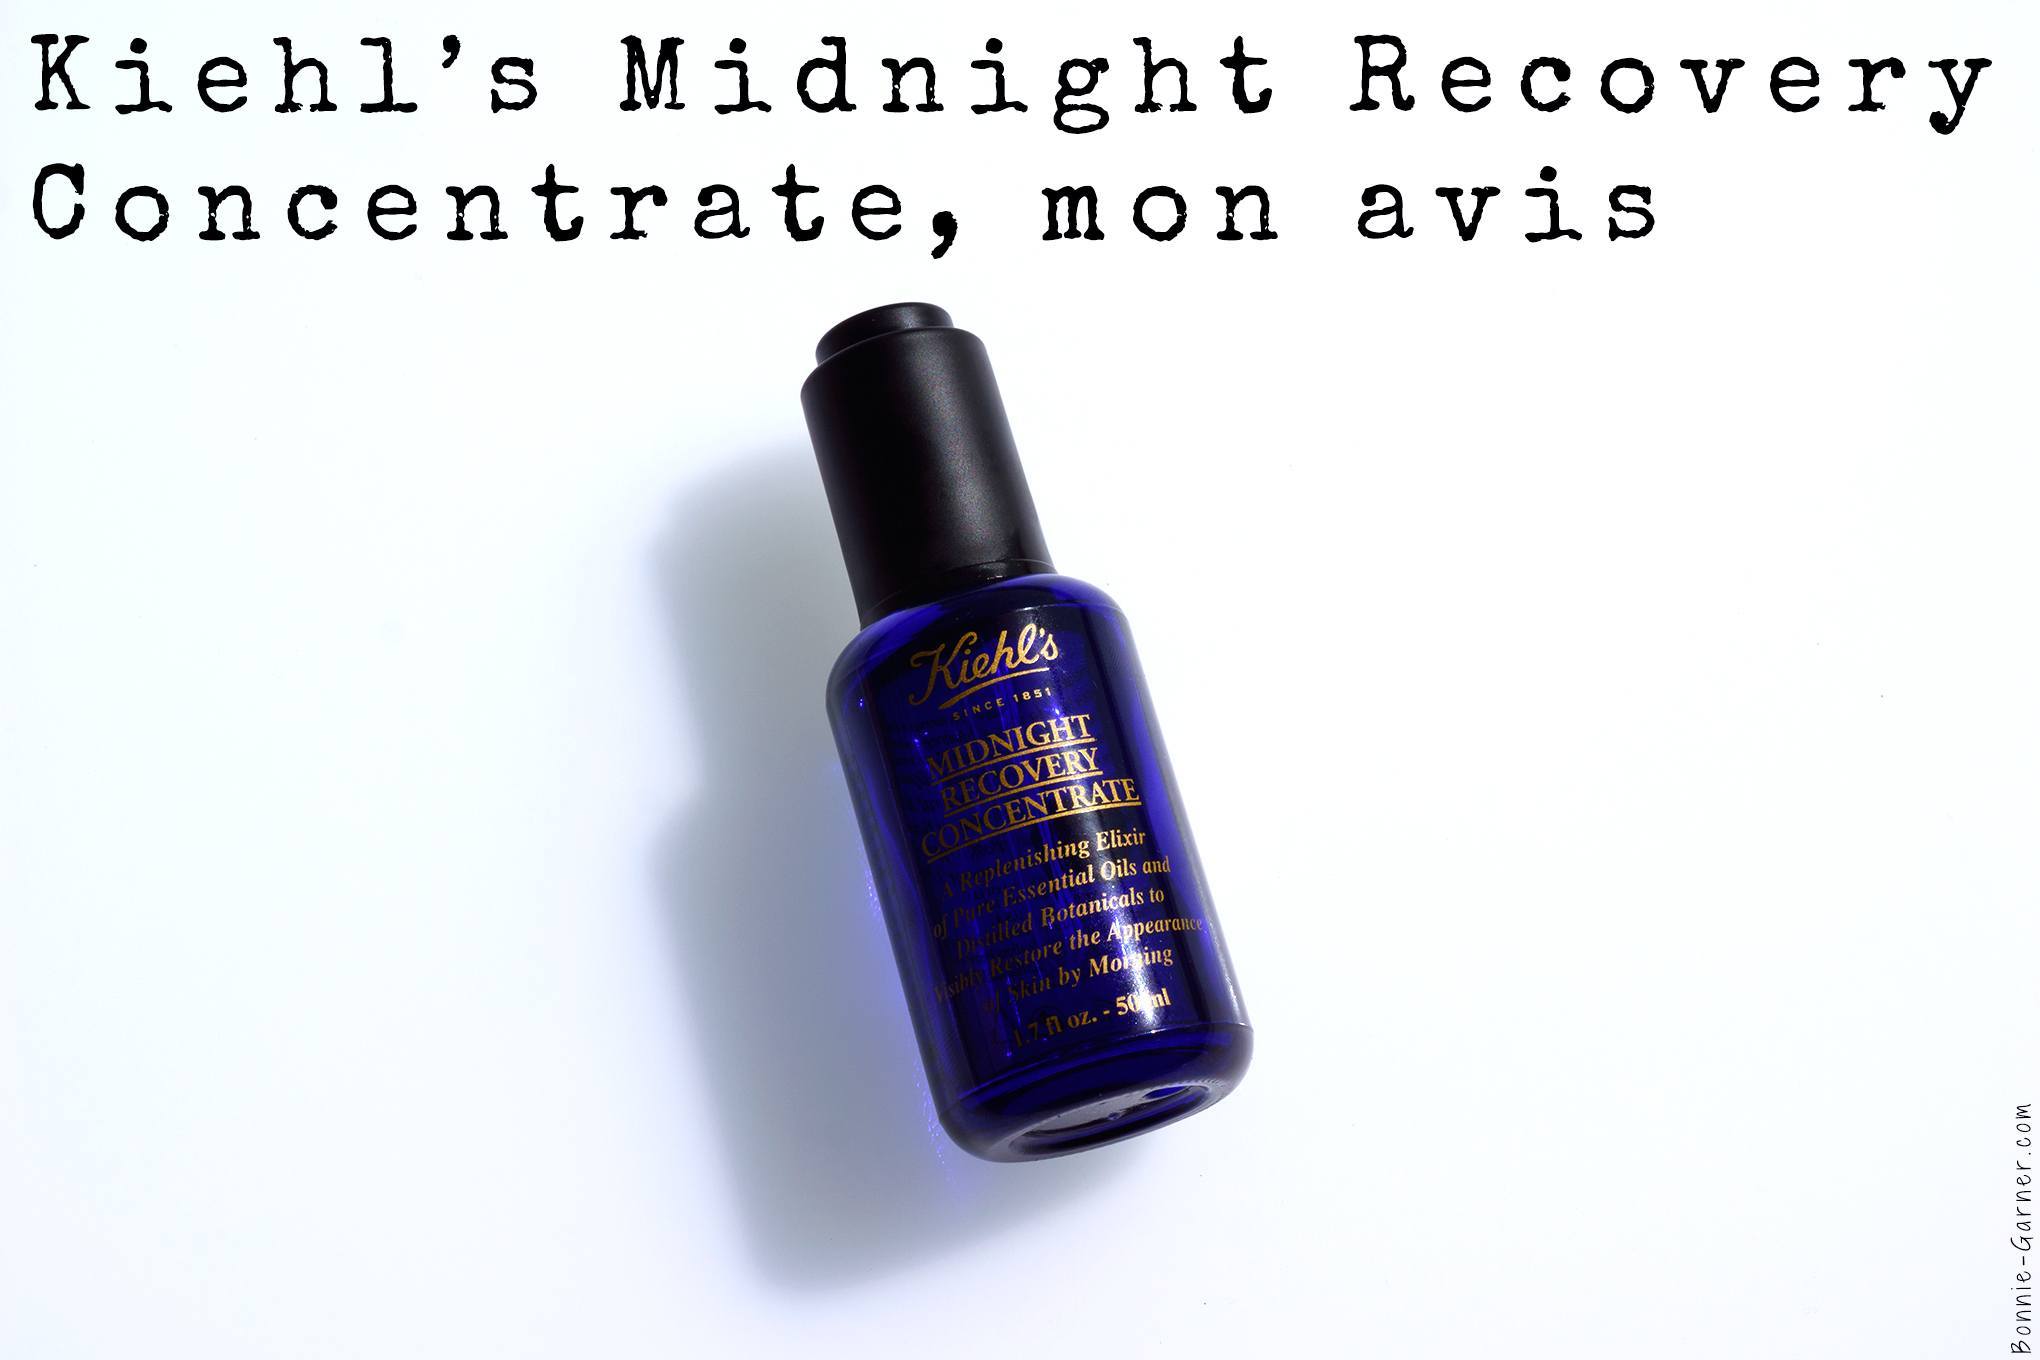 Kiehl's Midnight Recovery Concentrate, mon avis